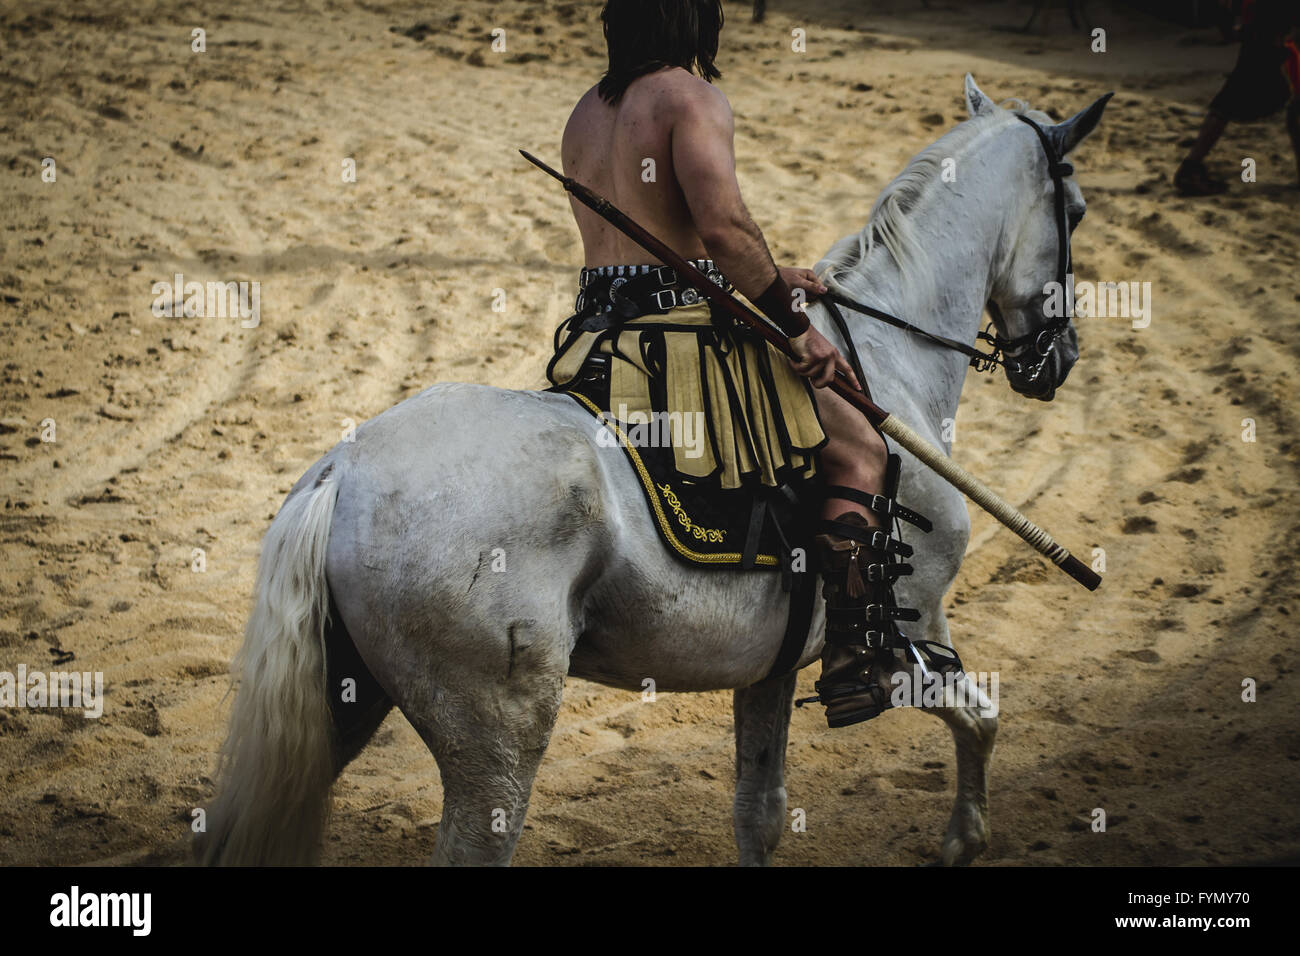 chariot race in a Roman circus, gladiators and slaves fighting Stock Photo